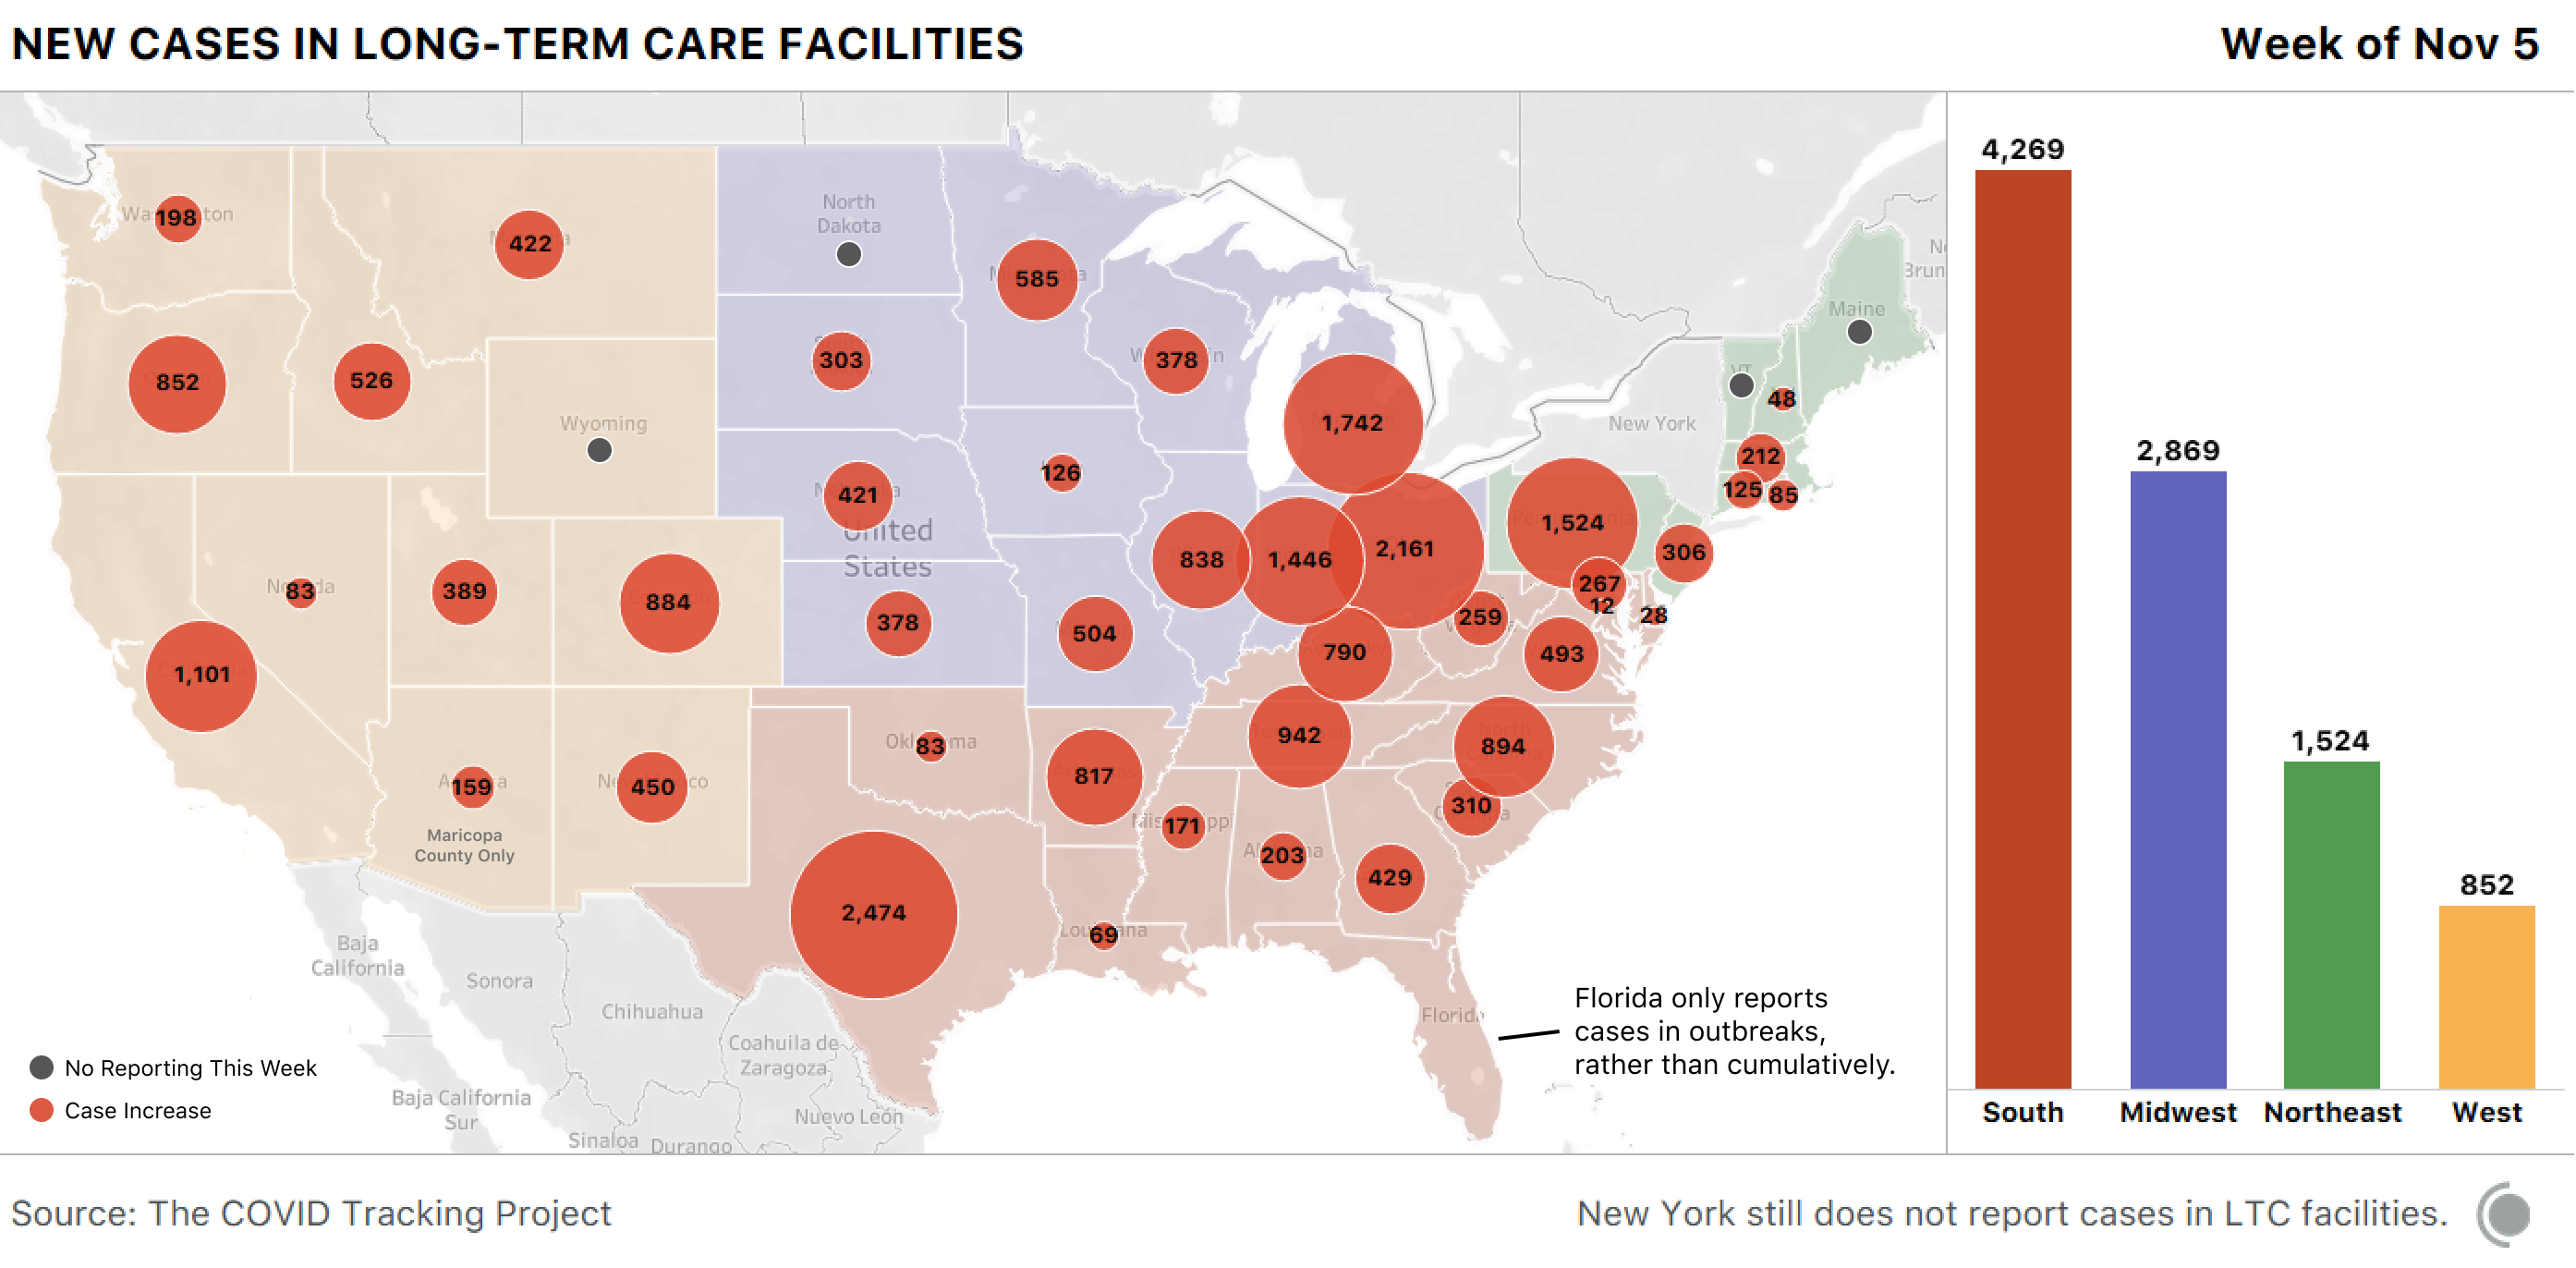 Map of the US showing new cases in LTC facilities this week. Texas saw the most cases with 2,474. Most cases are occurring in the South and Midwest.